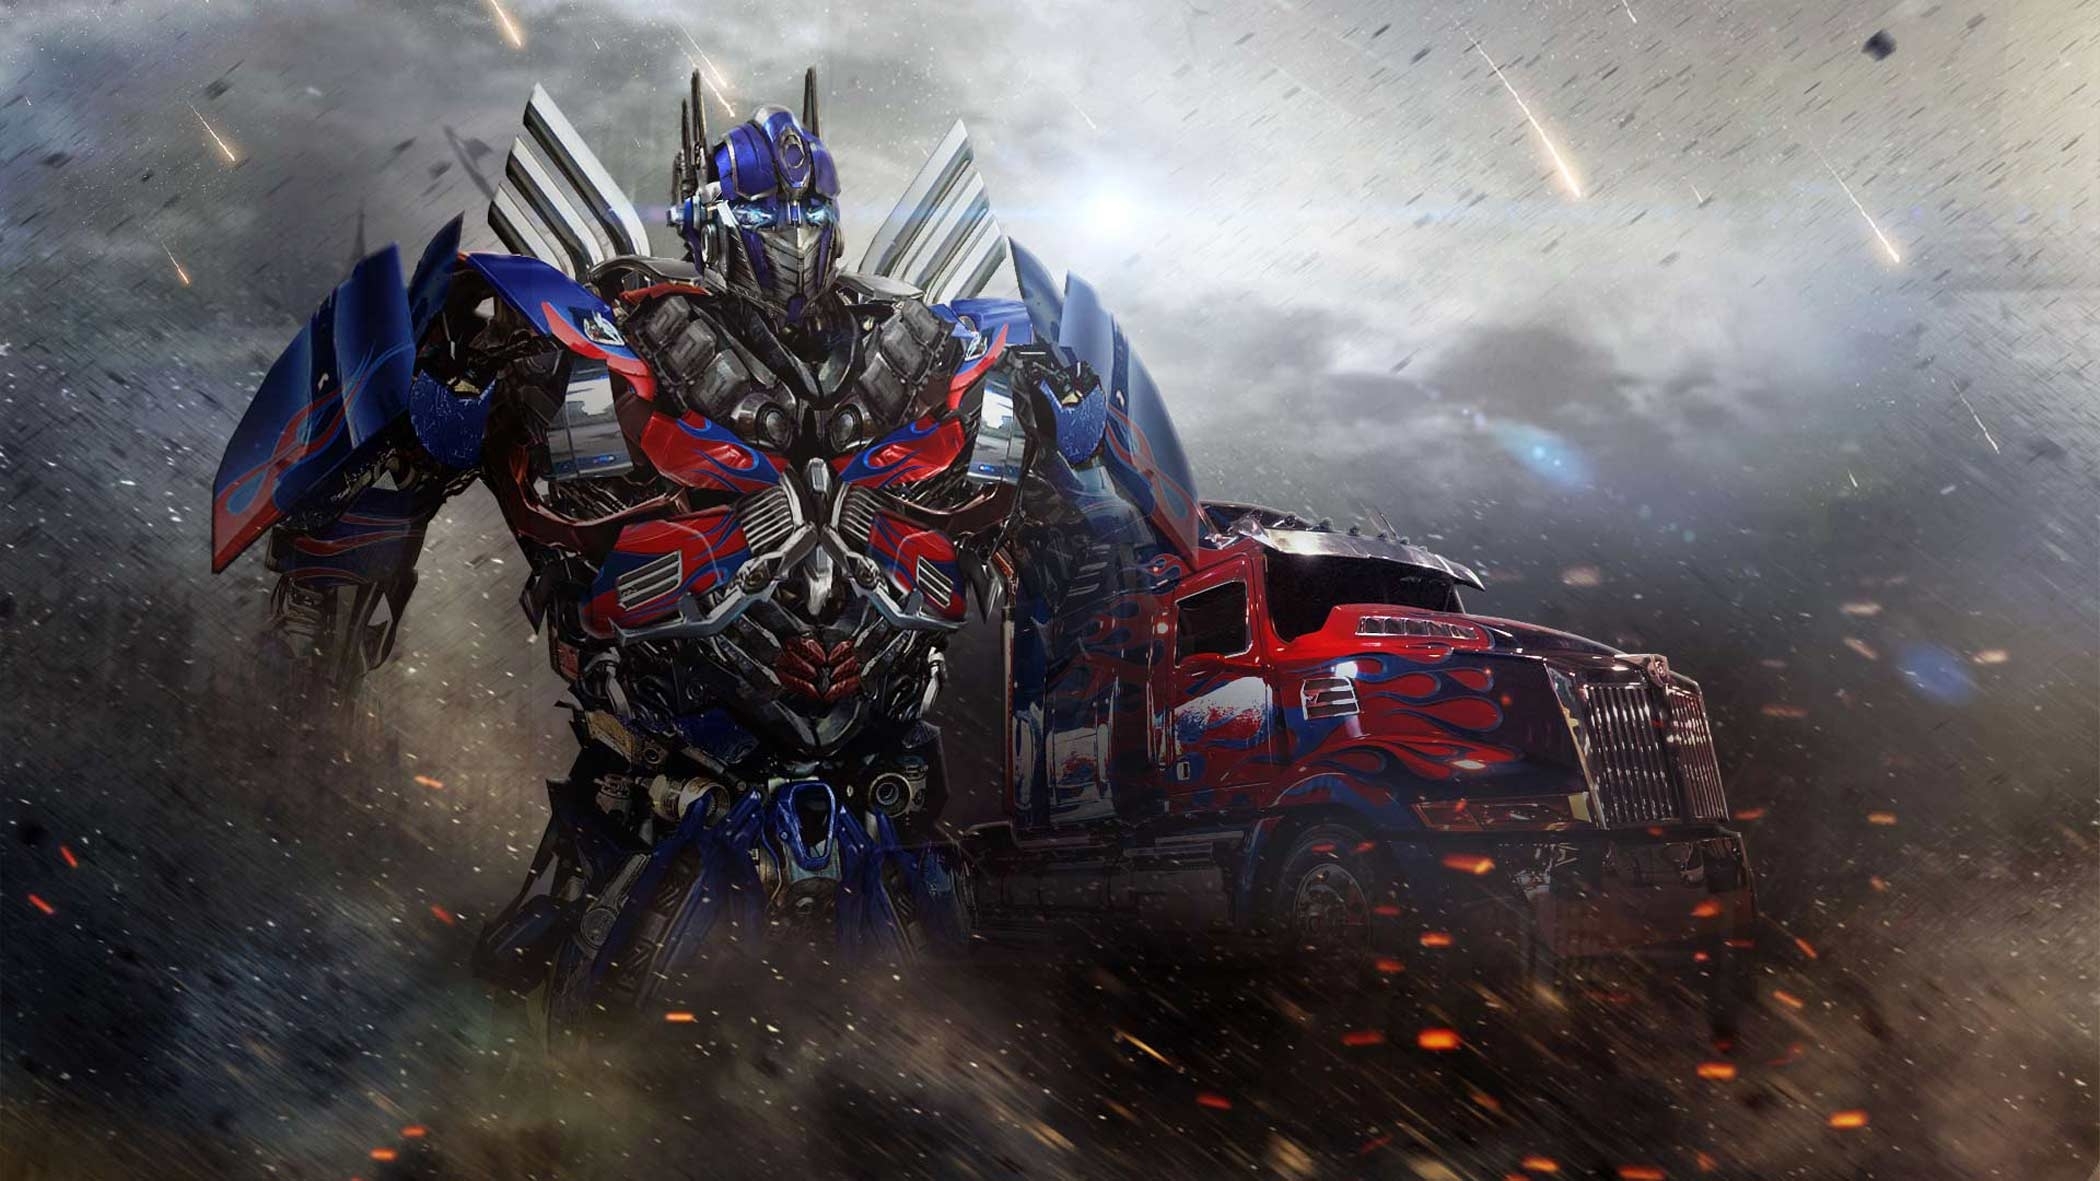 transformers-4-age-of-extinction-wallpapers-hd - wallpaper.wiki